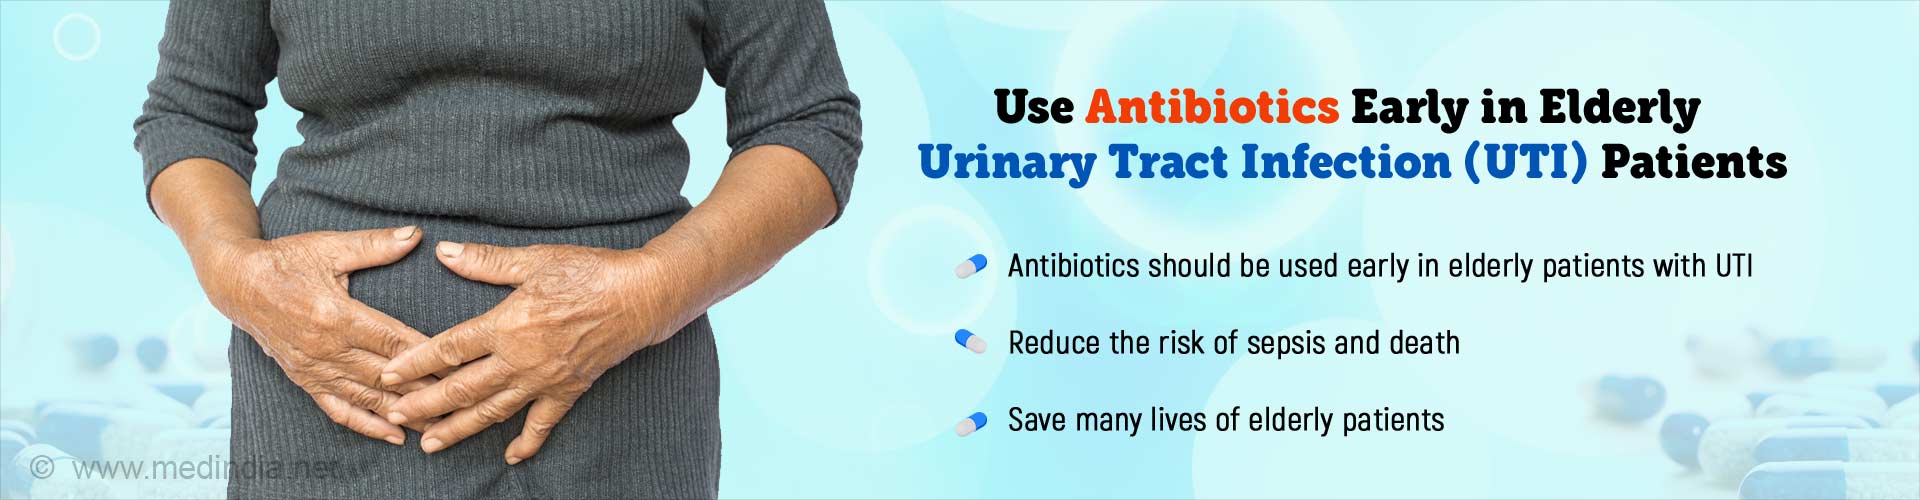 Use antibiotics early in elderly urinary tract infections (UTI) patients. Antibiotics should be used early in elderly patients with UTI. Reduces the risk of sepsis and death. Saves many lives of elderly patients.